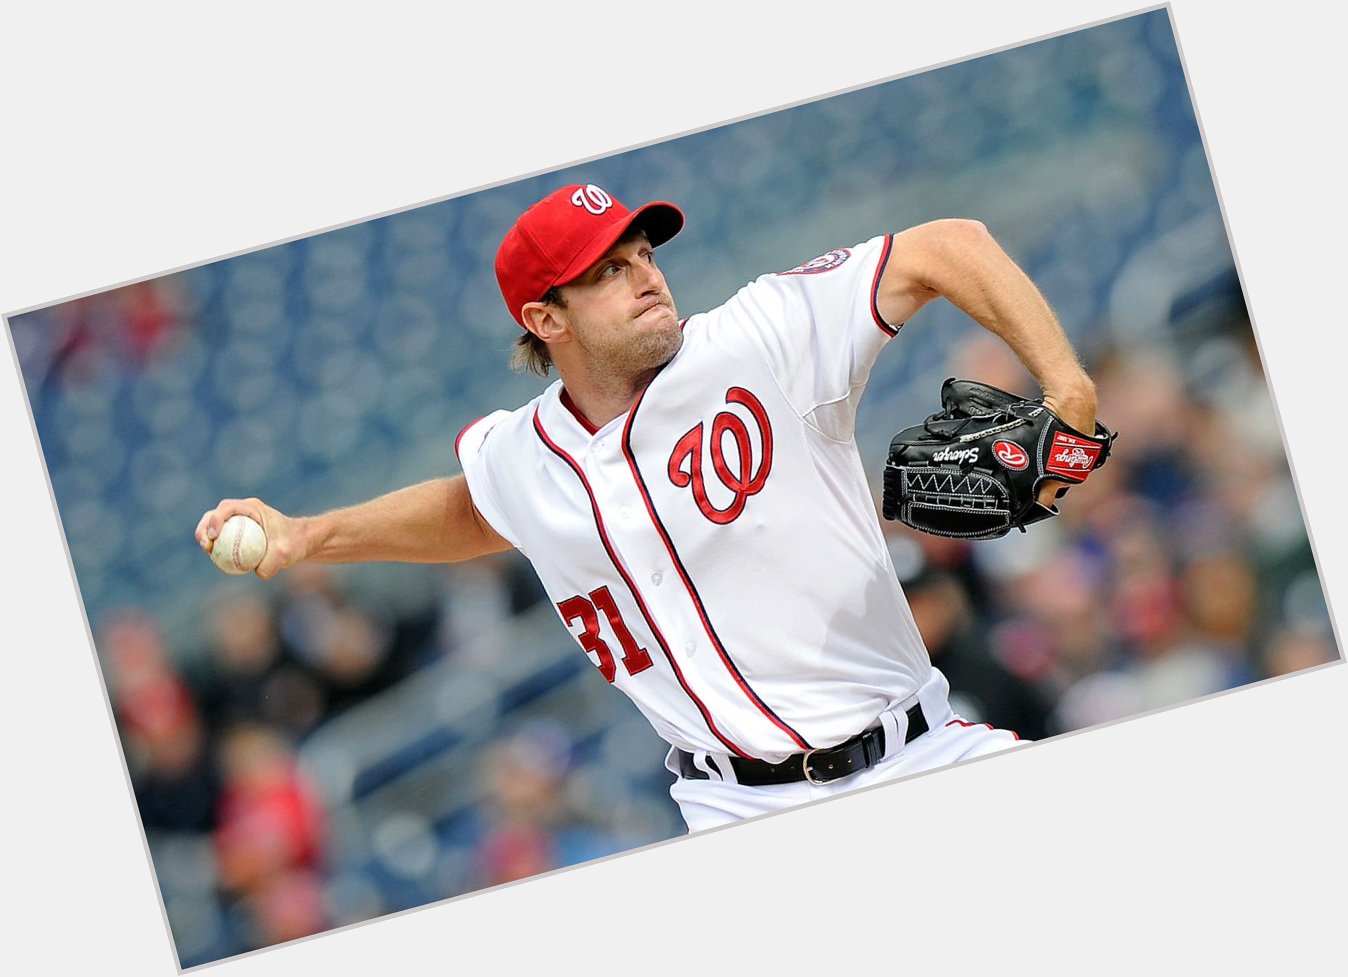 Happy birthday to one of the best pitchers in the game, Max Scherzer! 